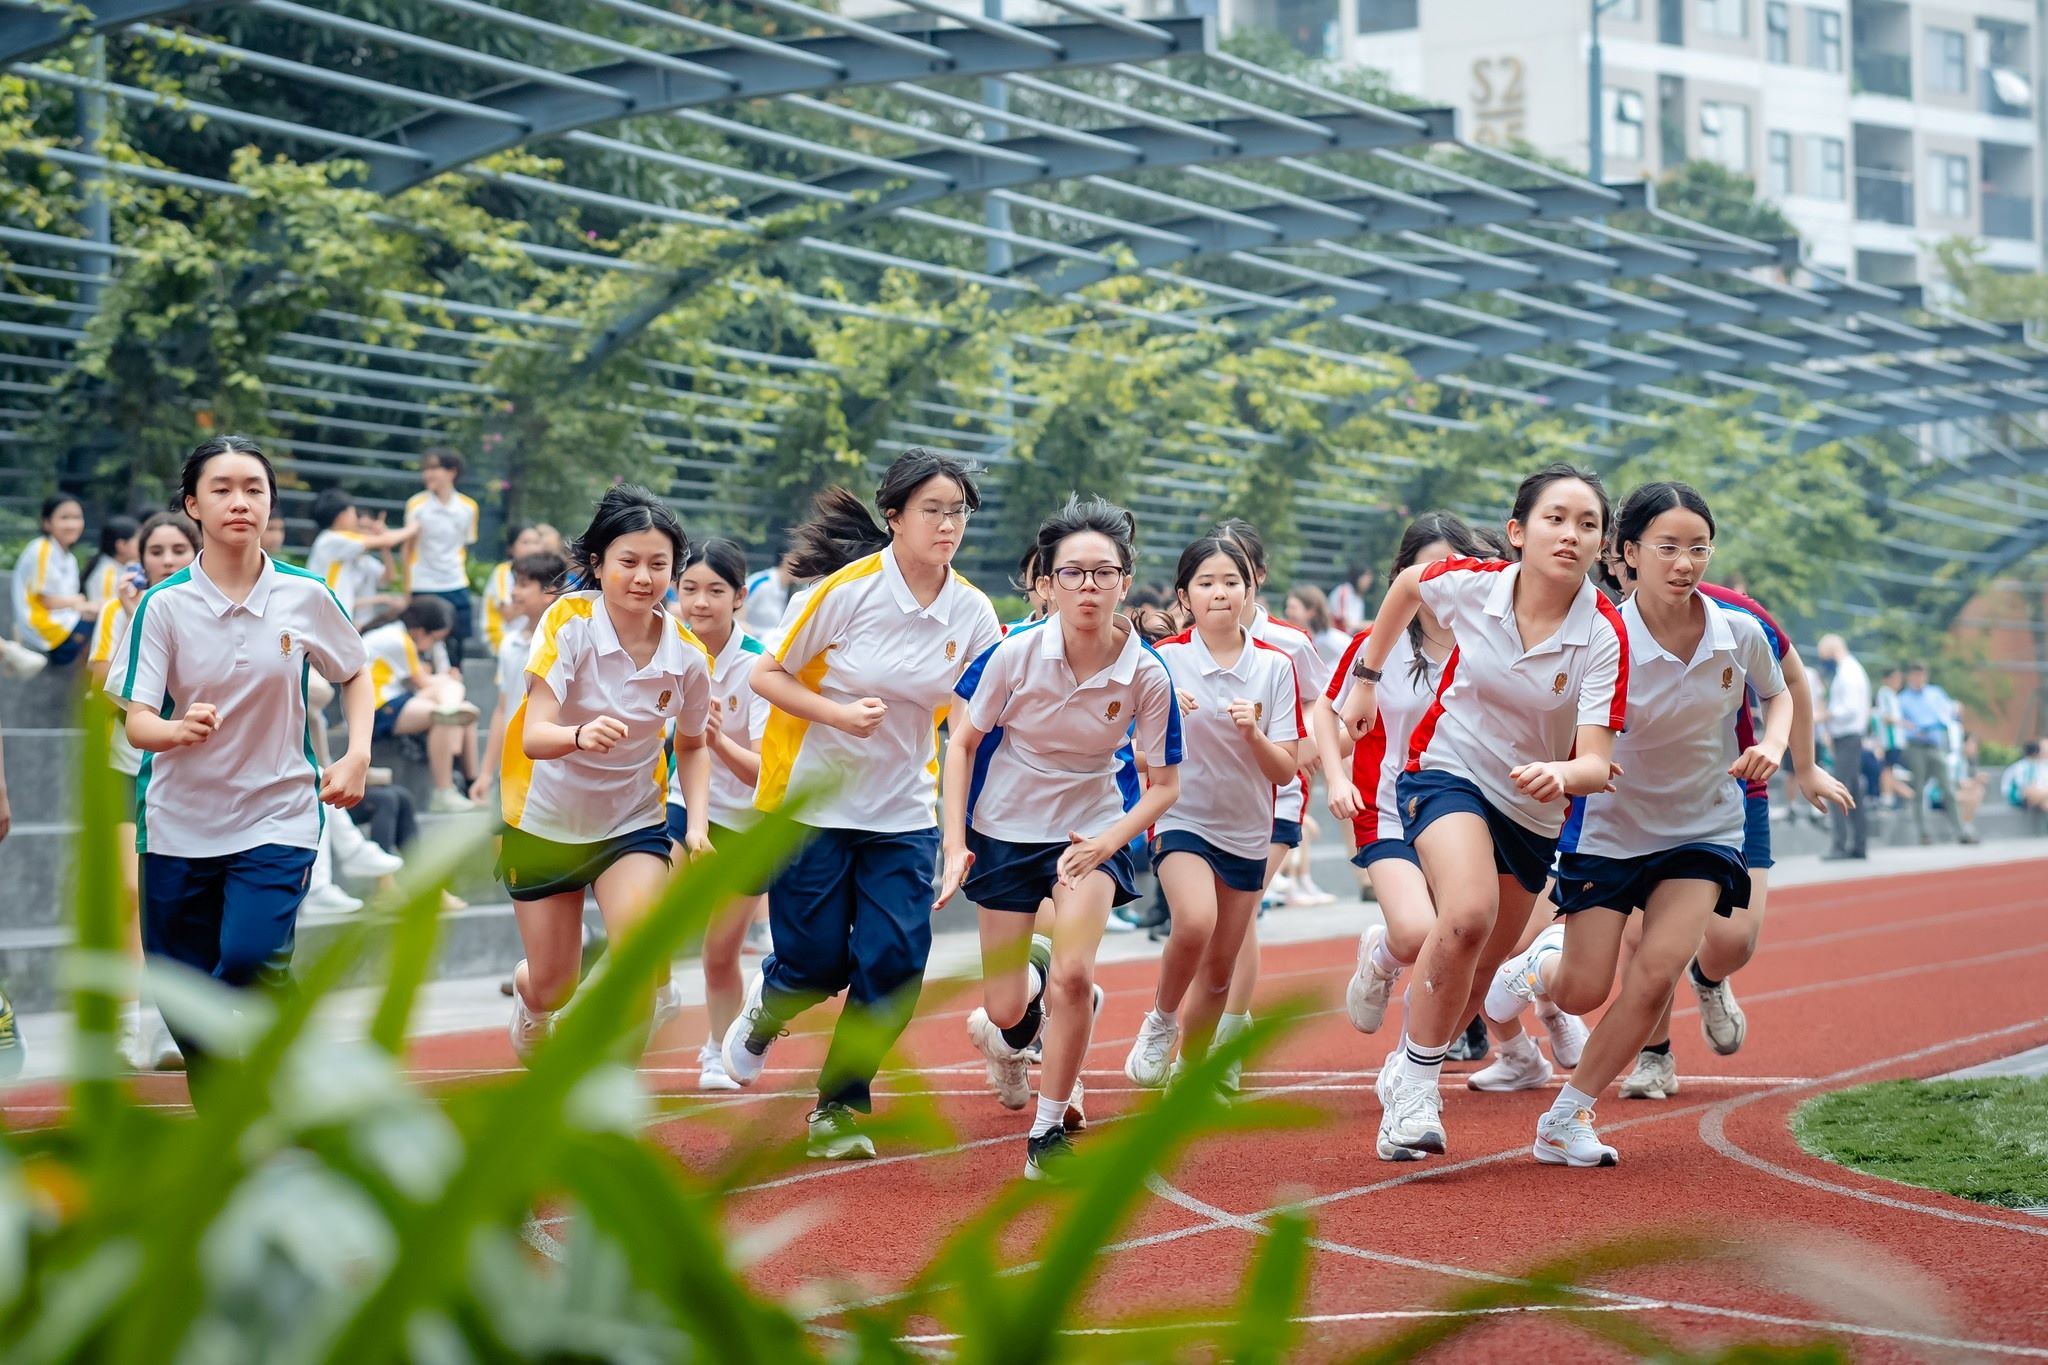 Pupils overcome their limits during individual races